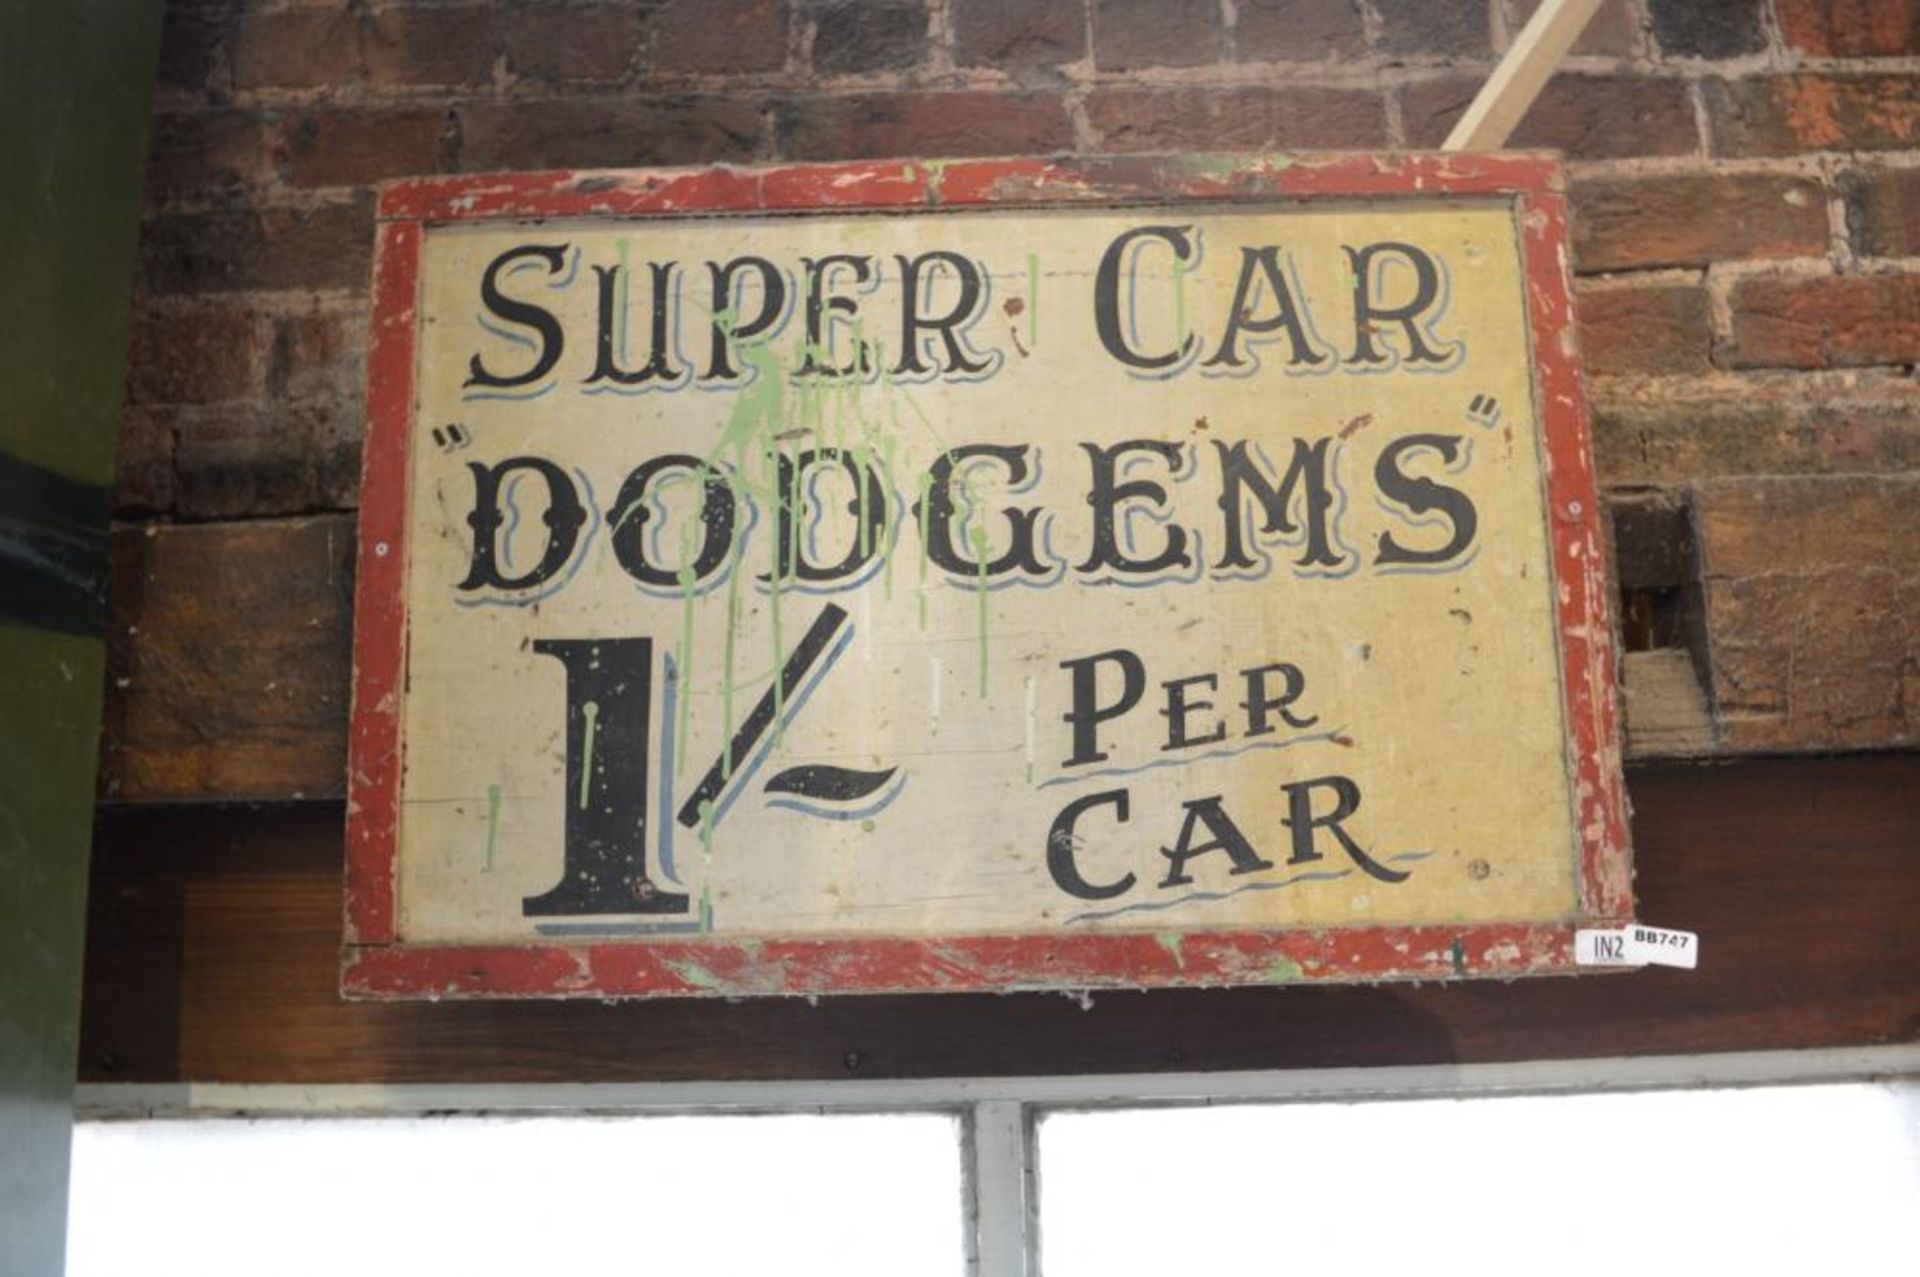 1 x Vintage Hand Painted "Super Car Dodgems 1 Shilling Per Car" Sign - 34 x 23 Inches - Ref BB747 - - Image 3 of 5